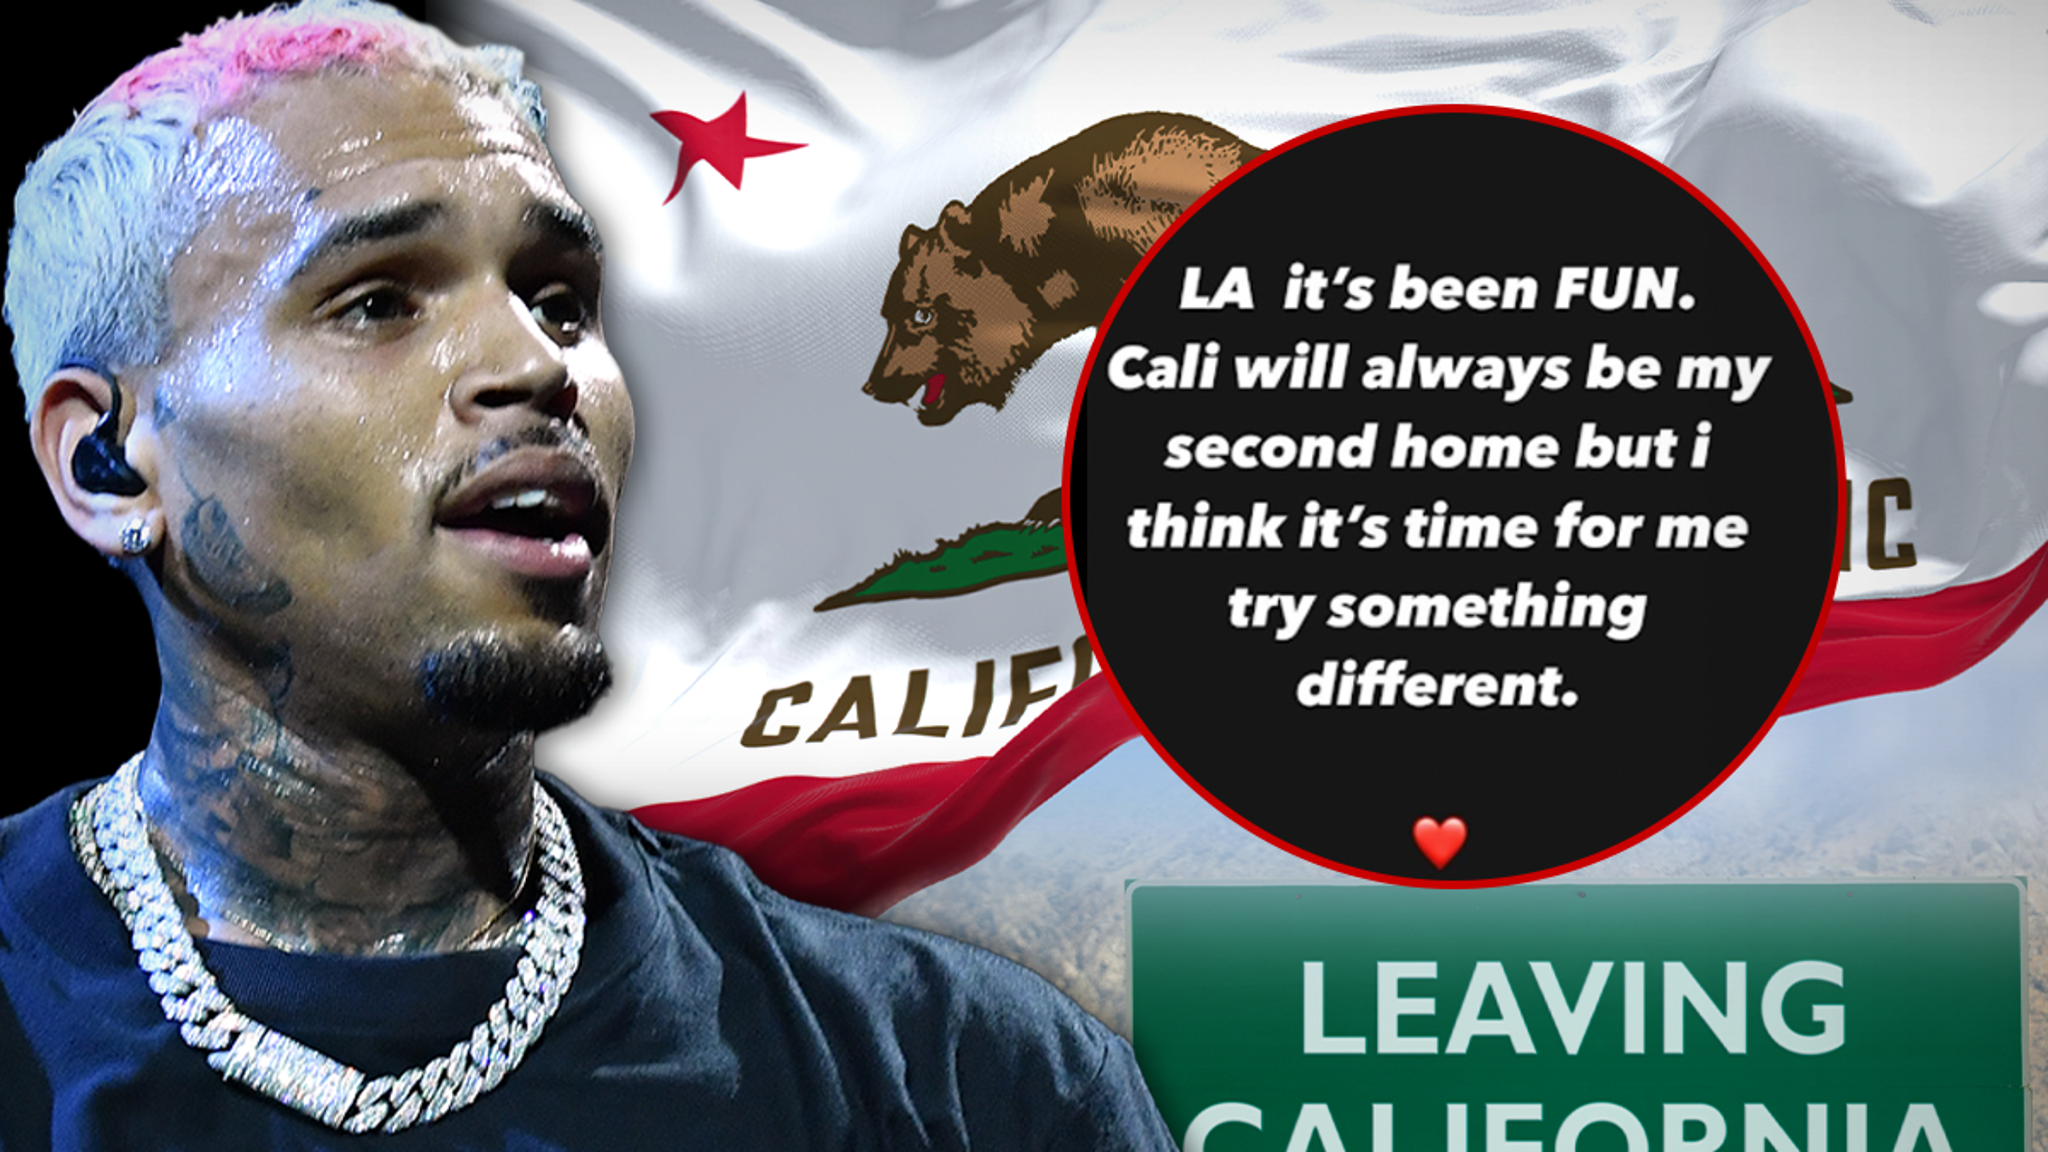 Chris Brown Announces Plans to Leave California: 'Time For Something New' #ChrisBrown